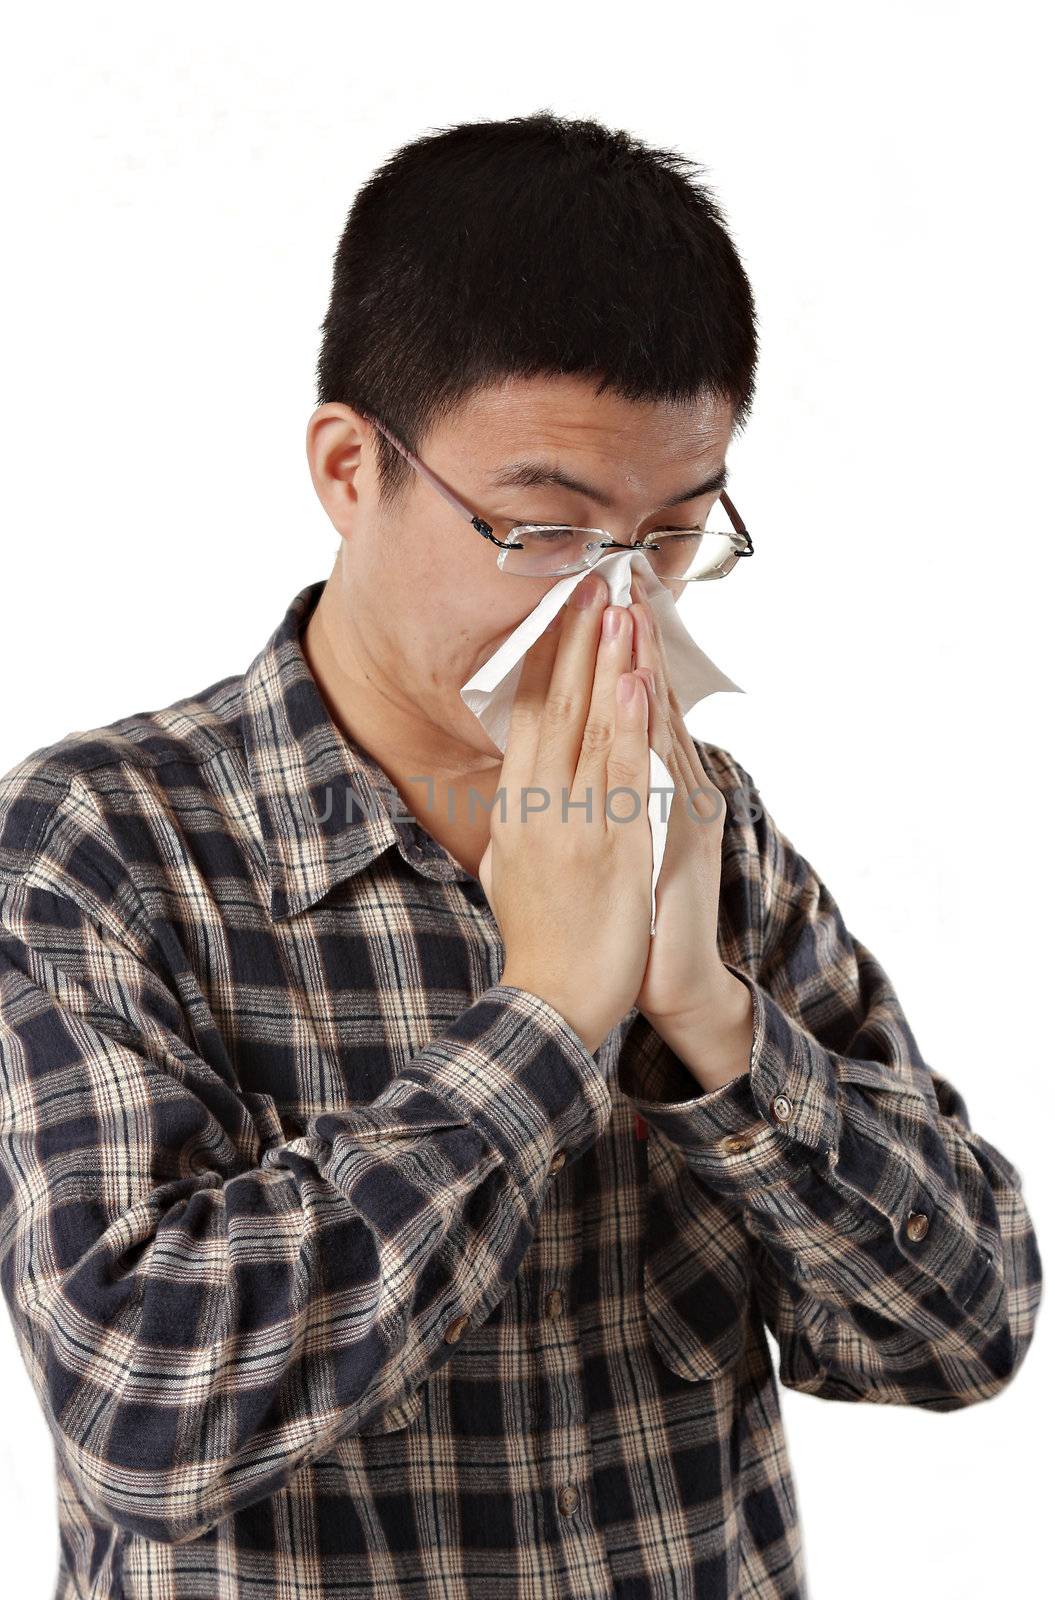 Young man with a cold blowing nose on tissue 